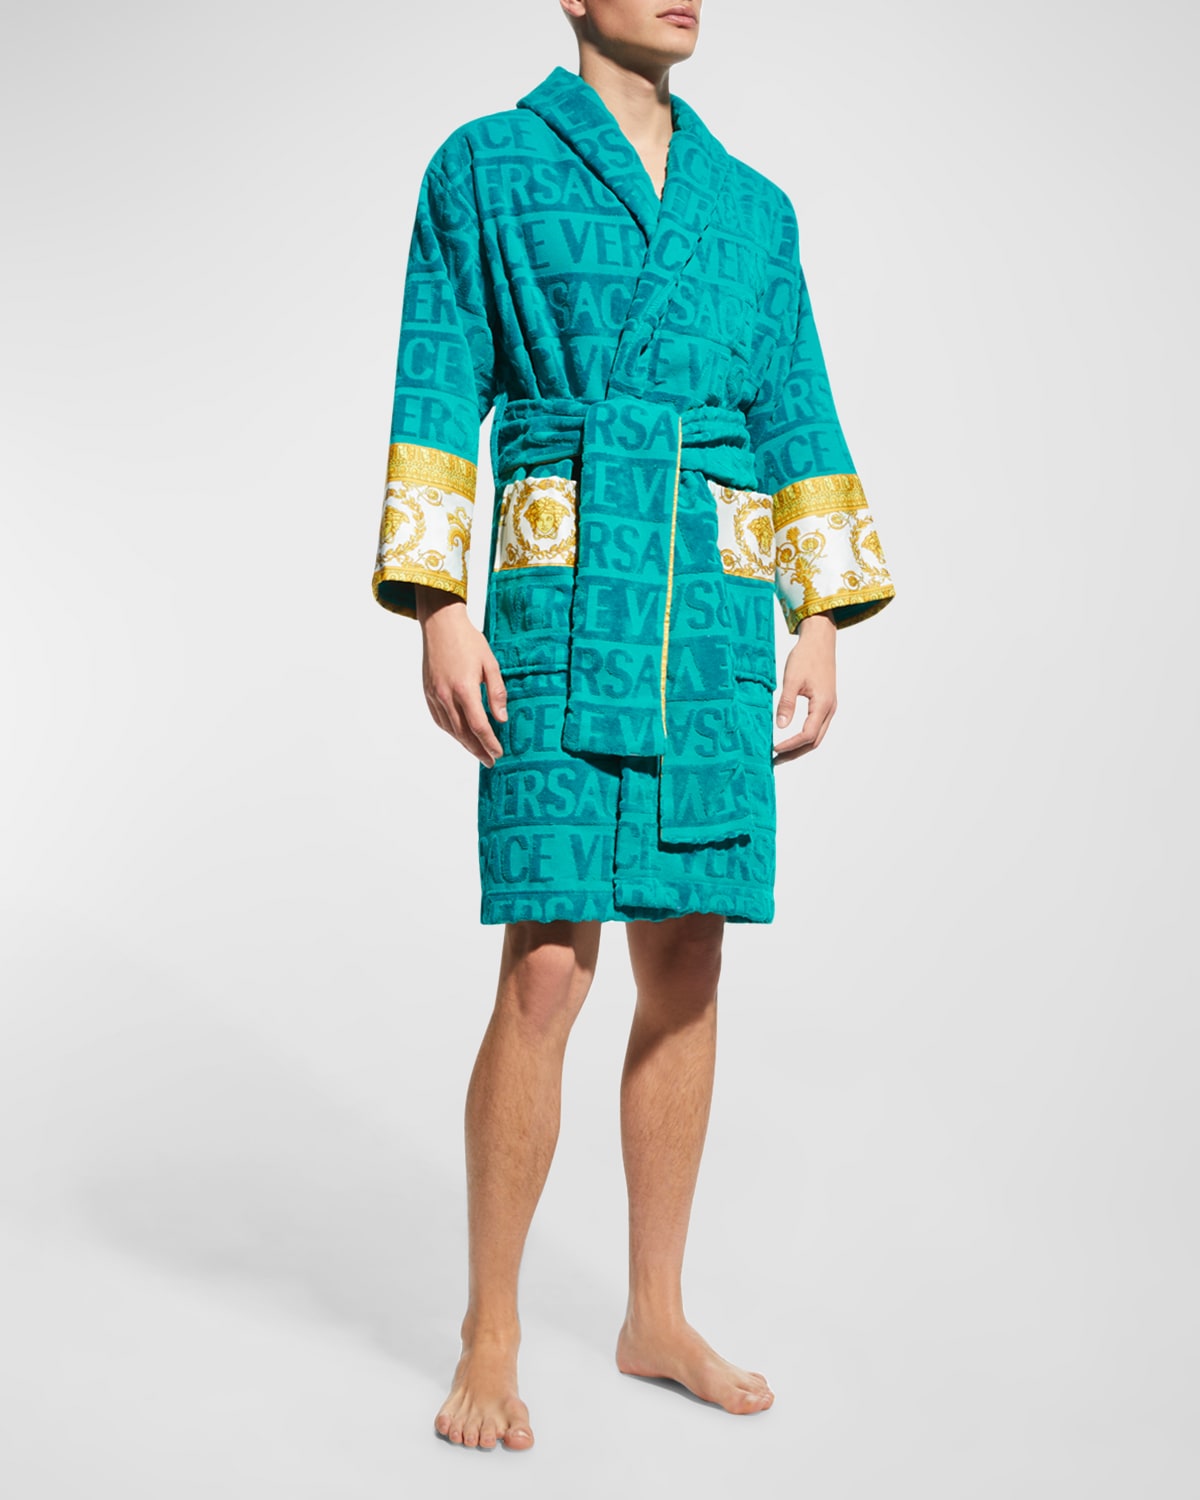 VERSACE UNISEX BAROCCO SLEEVE dressing gown,PROD215970047